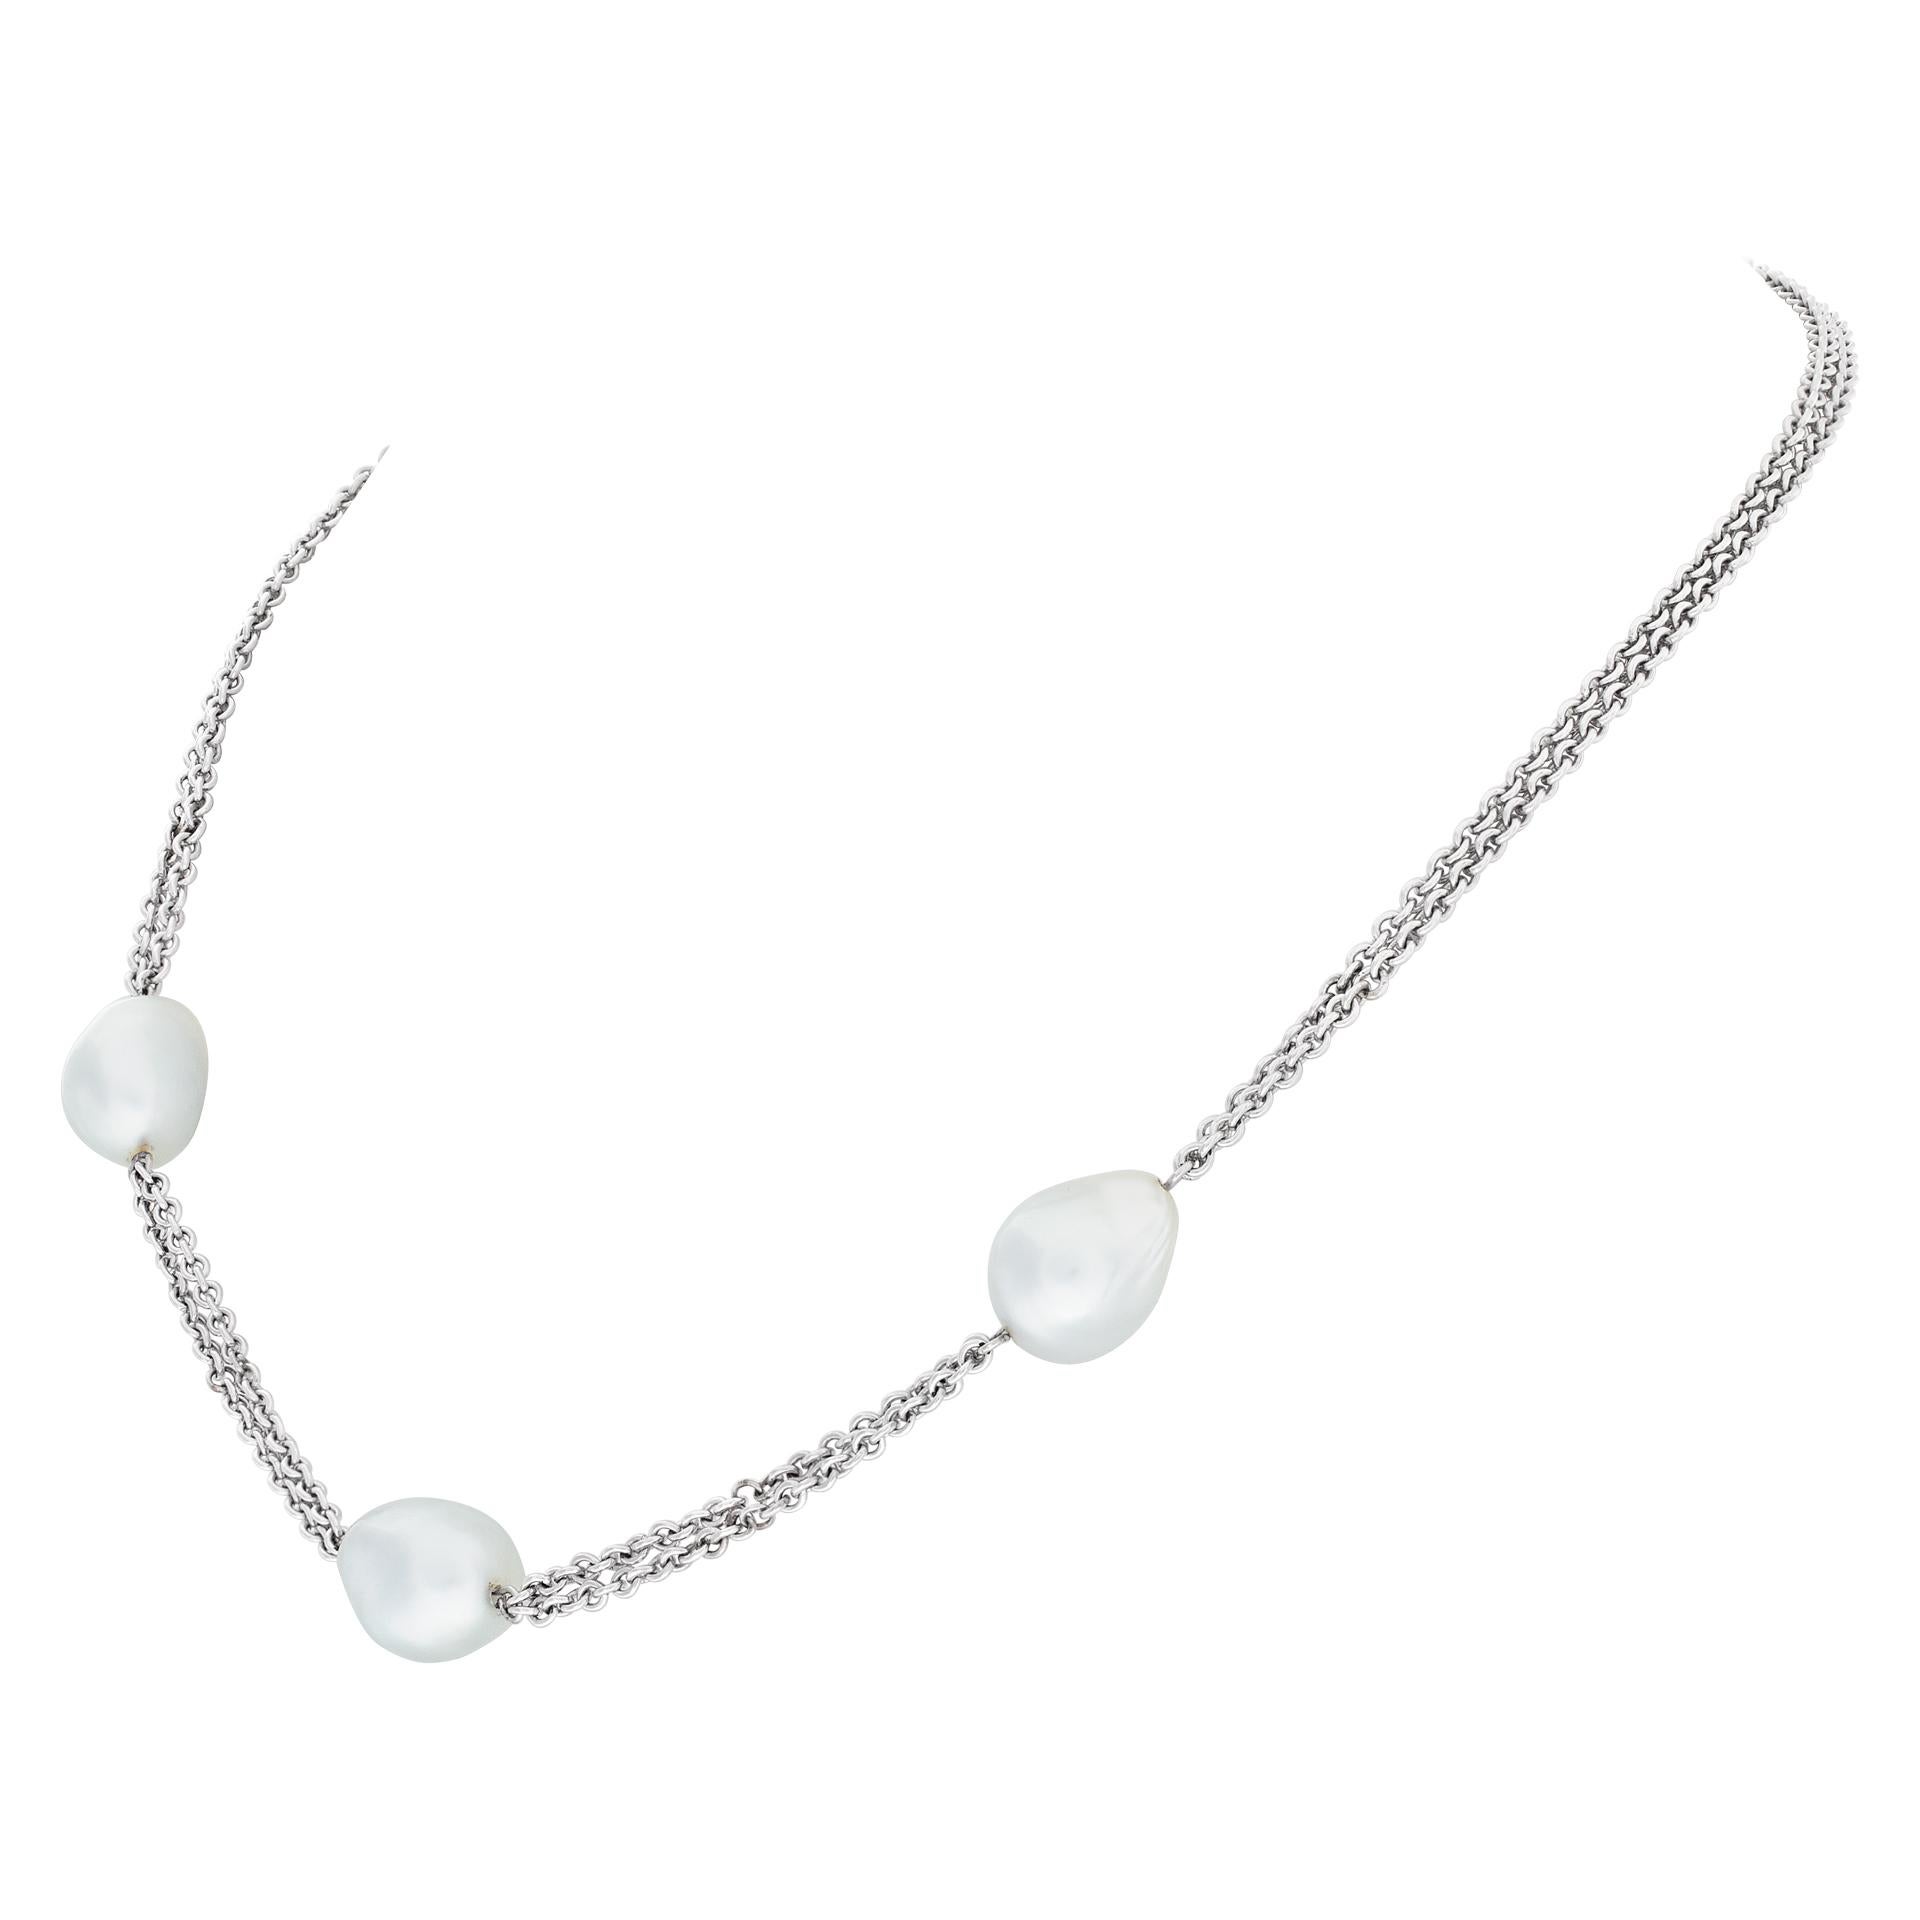 South Sea Pearl Necklace on 18k White Gold Chain In Excellent Condition For Sale In Surfside, FL